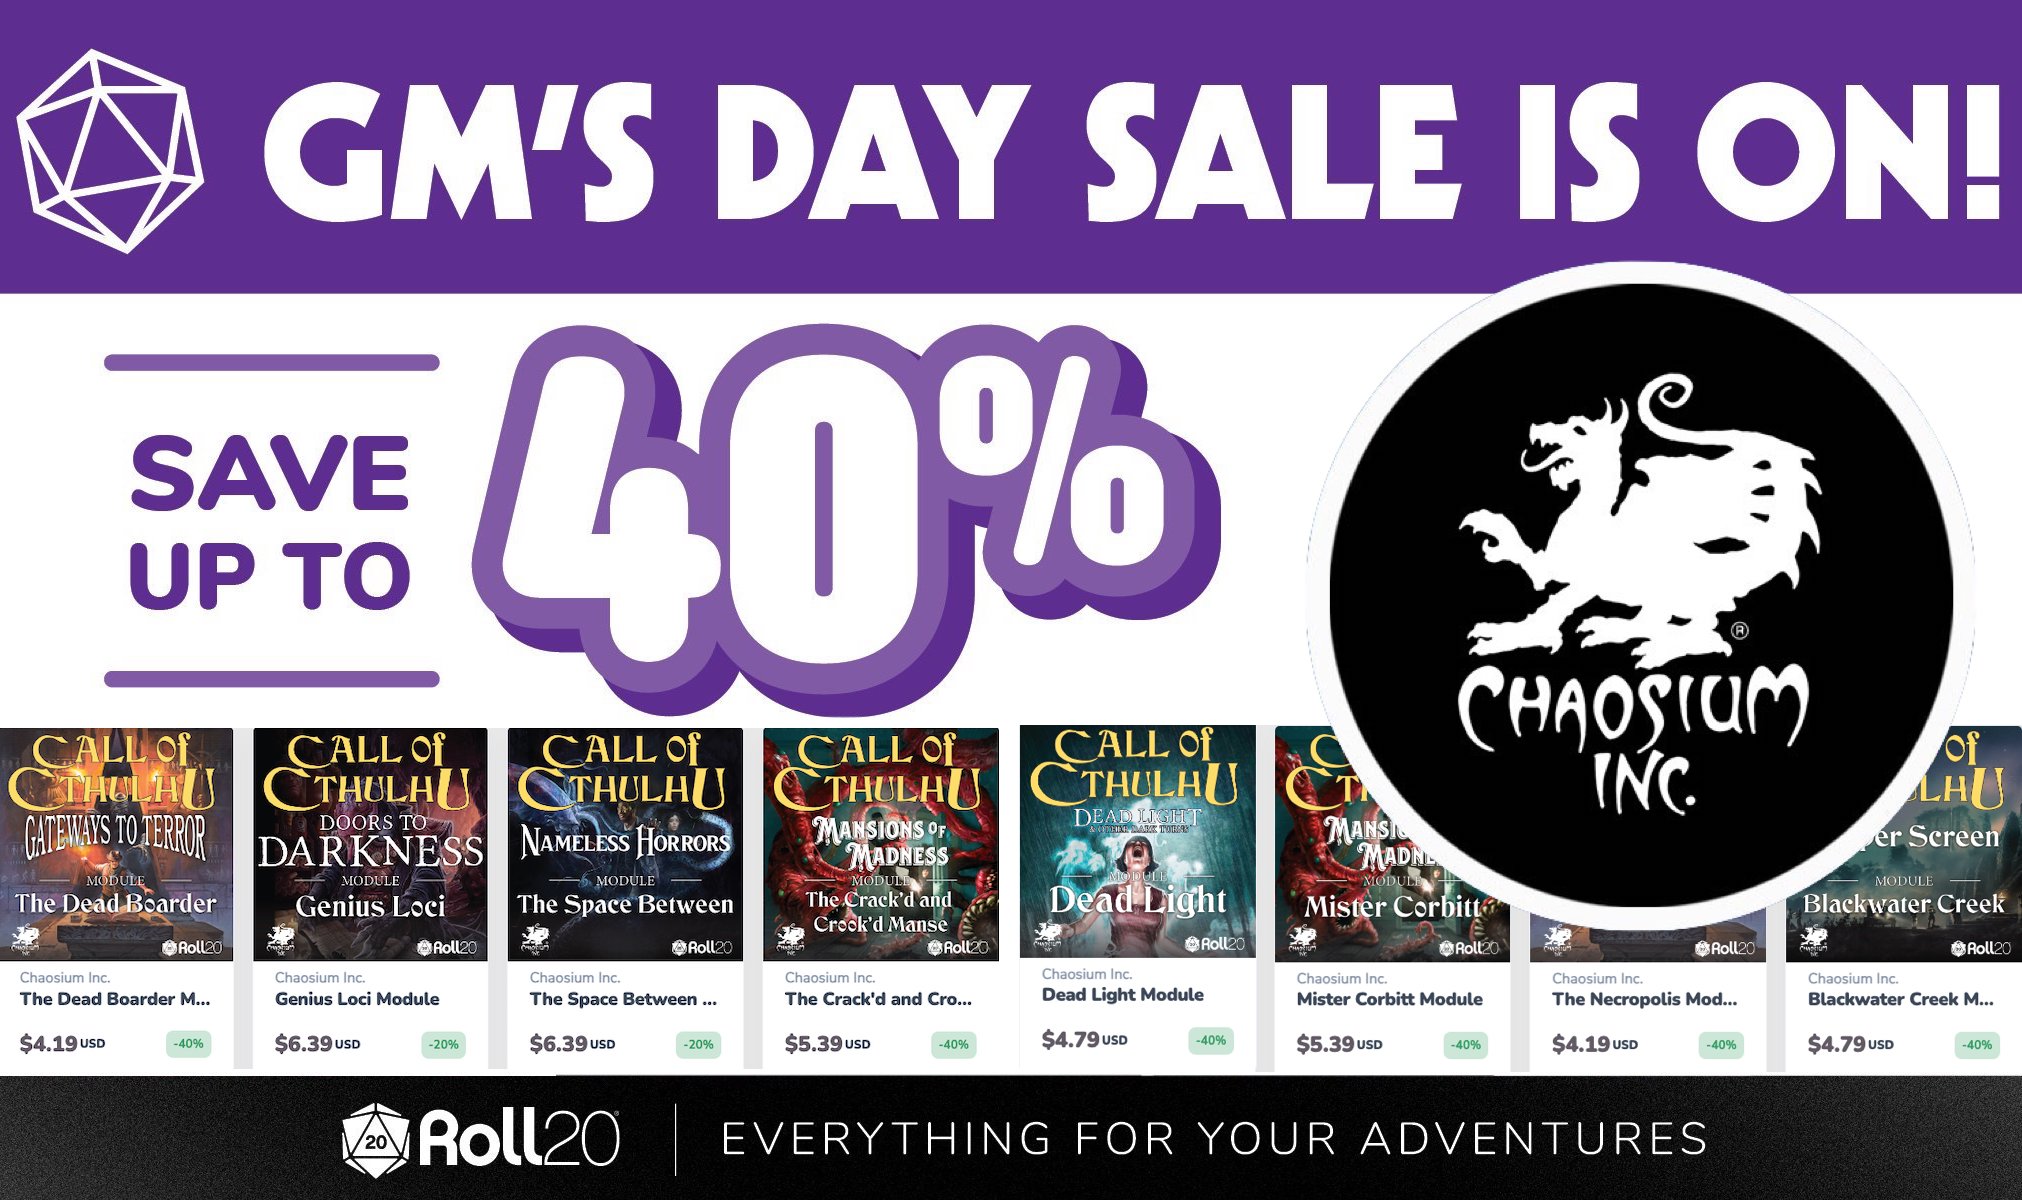 Roll20 GM's Day Sale